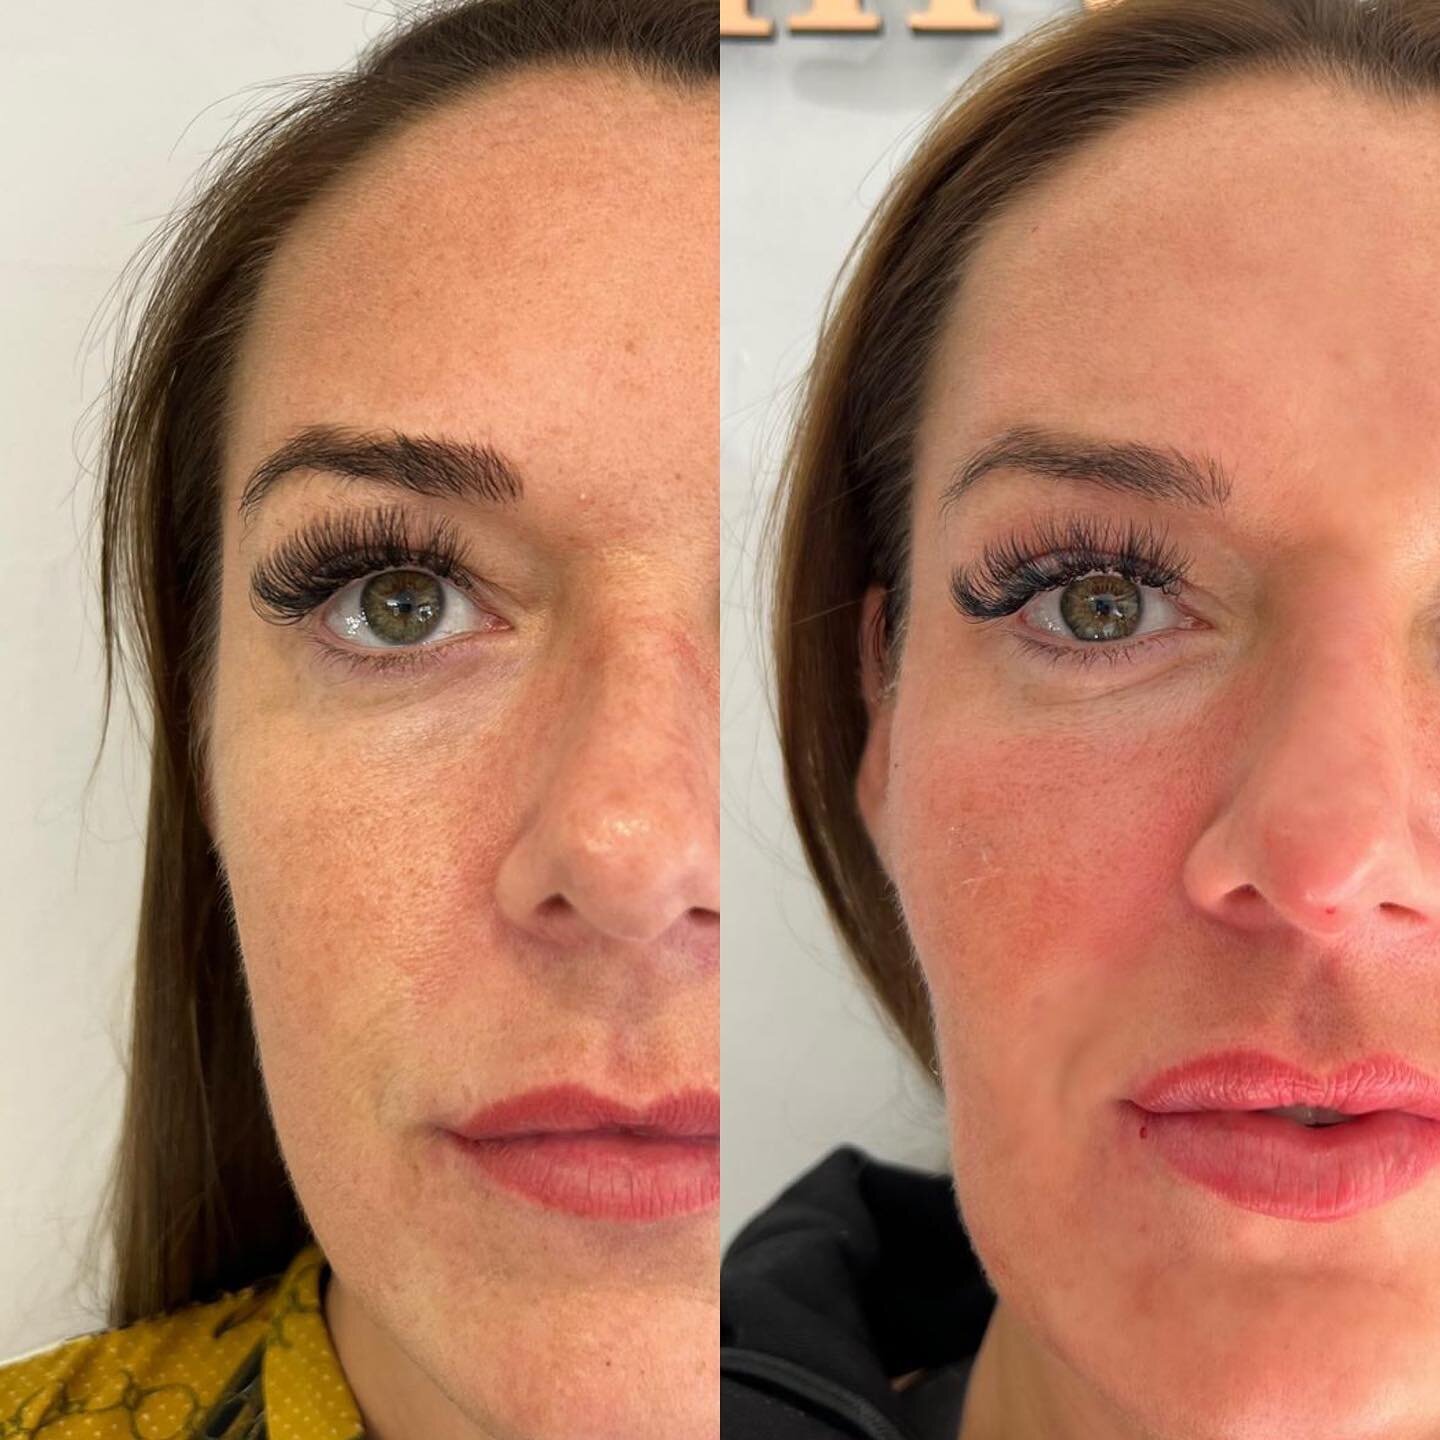 Profhilo Skin Transformation, our favourite 𝙄𝙣𝙟𝙚𝙘𝙩𝙖𝙗𝙡𝙚 𝙈𝙤𝙞𝙨𝙩𝙪𝙧𝙞𝙨𝙚𝙧 💧💭

✔️ Better skin texture 
✔️ Smoother skin 
✔️ Hydrated 

Wake up with 𝐠𝐥𝐨𝐰𝐢𝐧𝐠, 𝐩𝐥𝐮𝐦𝐩𝐞𝐝, 𝐬𝐦𝐨𝐨𝐭𝐡 filter-free skin everyday 💧

(Her skin is